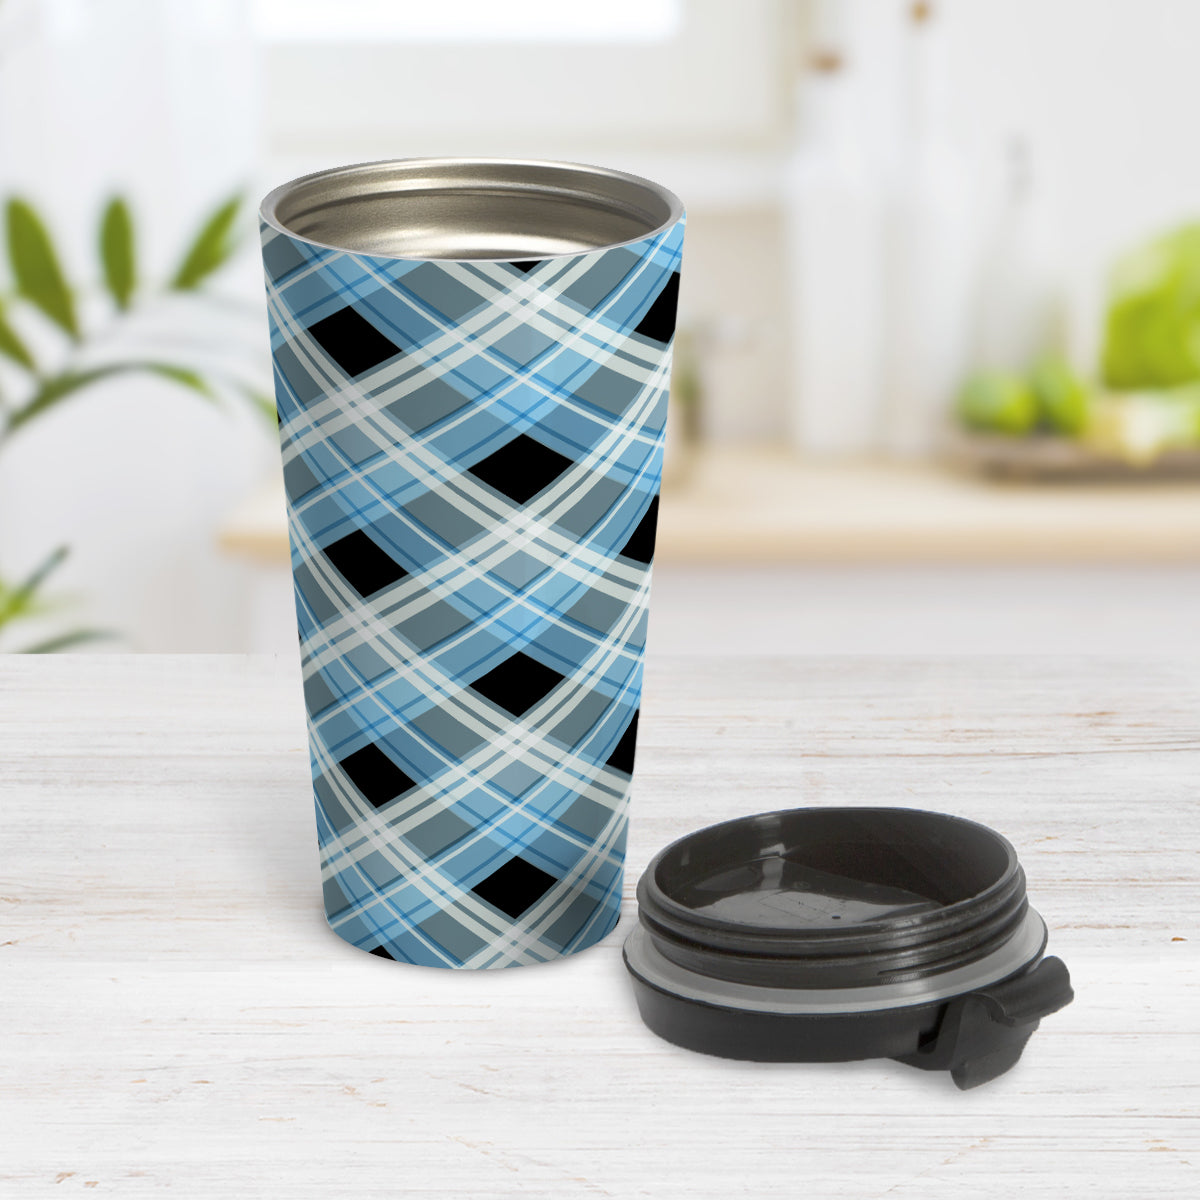 Alternative Blue Plaid Travel Mug (15oz) at Amy's Coffee Mugs. A stainless steel travel mug designed with a diagonal blue, black, and white plaid pattern that wraps around the mug. Designed for someone who likes plaid patterns and loves the color blue. Photo shows the mug open with the lid on the table beside it. 